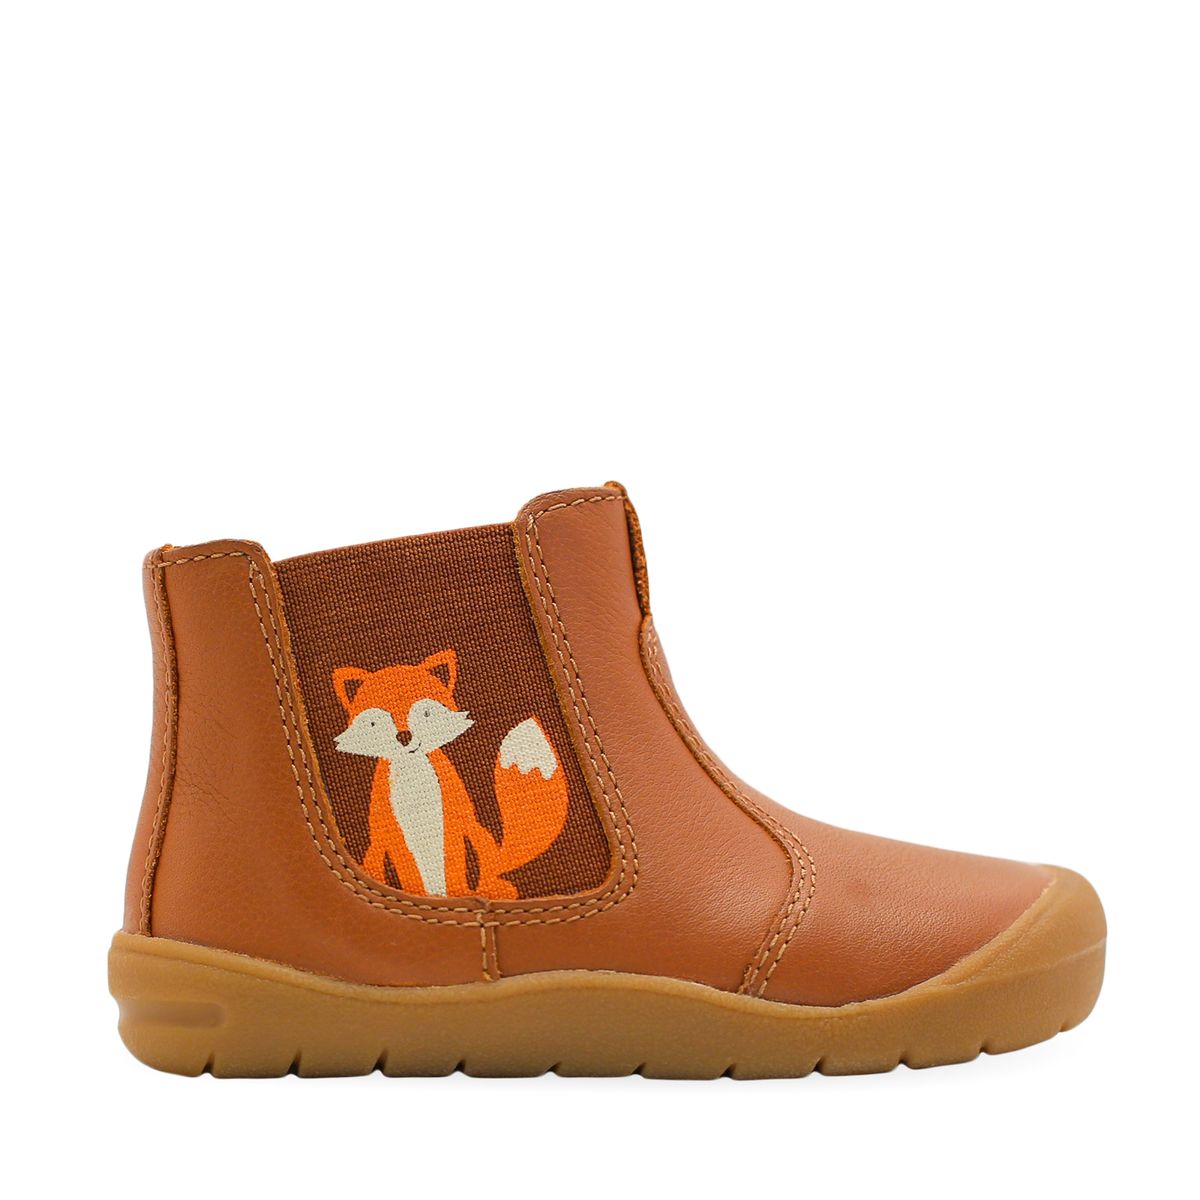 'Friend' in Tan Leather with Fox design from the exclusive Start-Rite Shoes and JoJo Maman Bébé Collection 